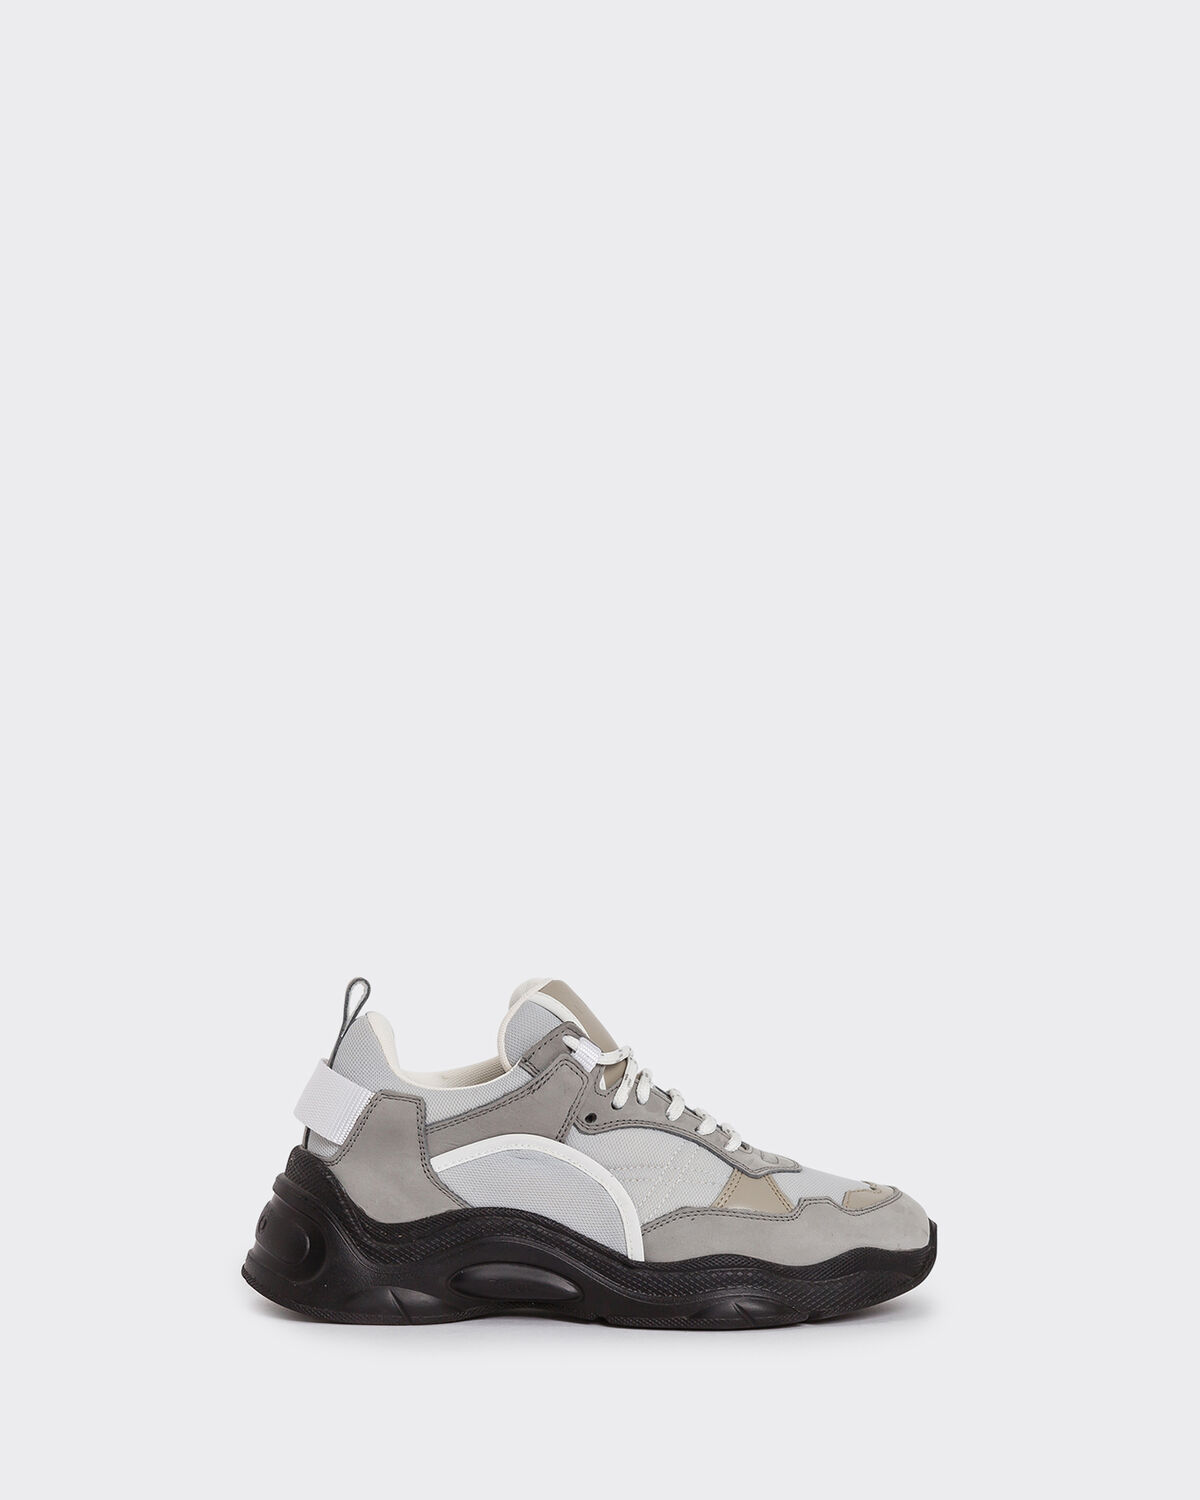 Photo of IRO Paris Curverunner Sneakers Grey - These Sportswear Sneakers Inspired By The 1990s Are Essential To The Iro Cloakroom This Season. Dare To Use Contrasts And Combine This Pair Of Dad Shoes With A Small Fluid Dress. Choose The Size Below Your Usual One. Fall Winter 19